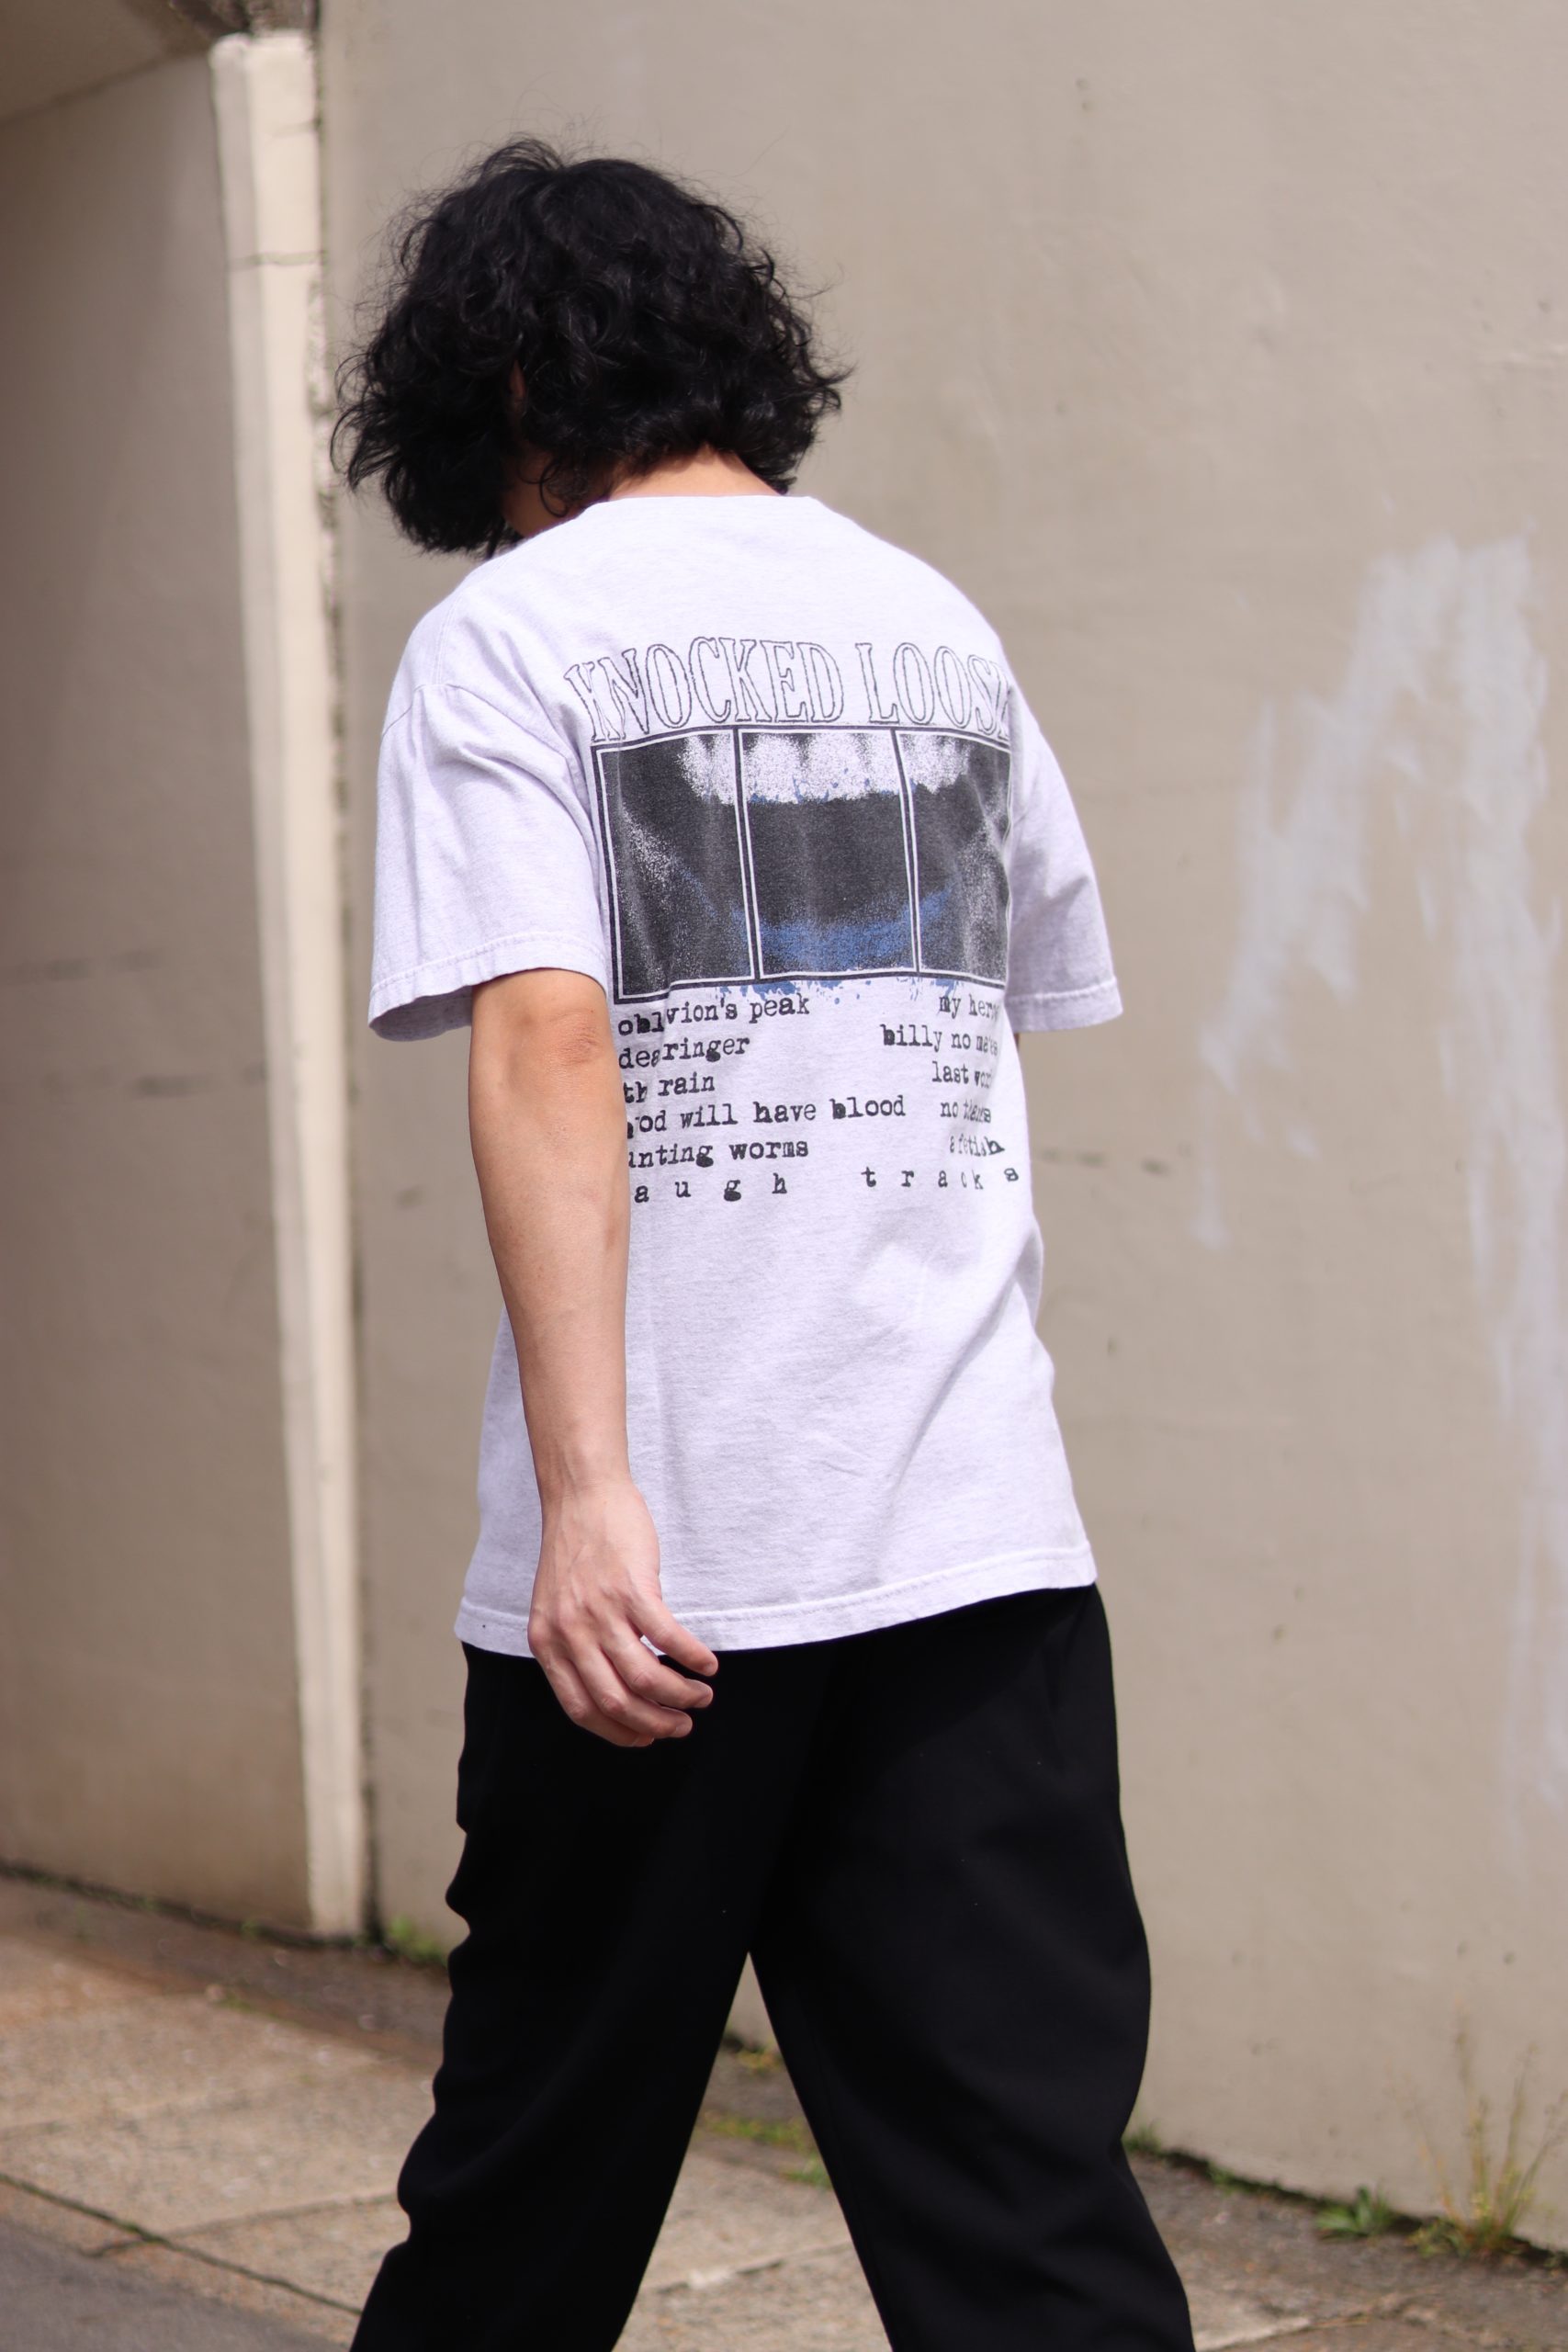 Knocked Loose /ノックド・ルーズ - Mistakes Like Fractures Tシャツ(ブラック), Ｔシャツ